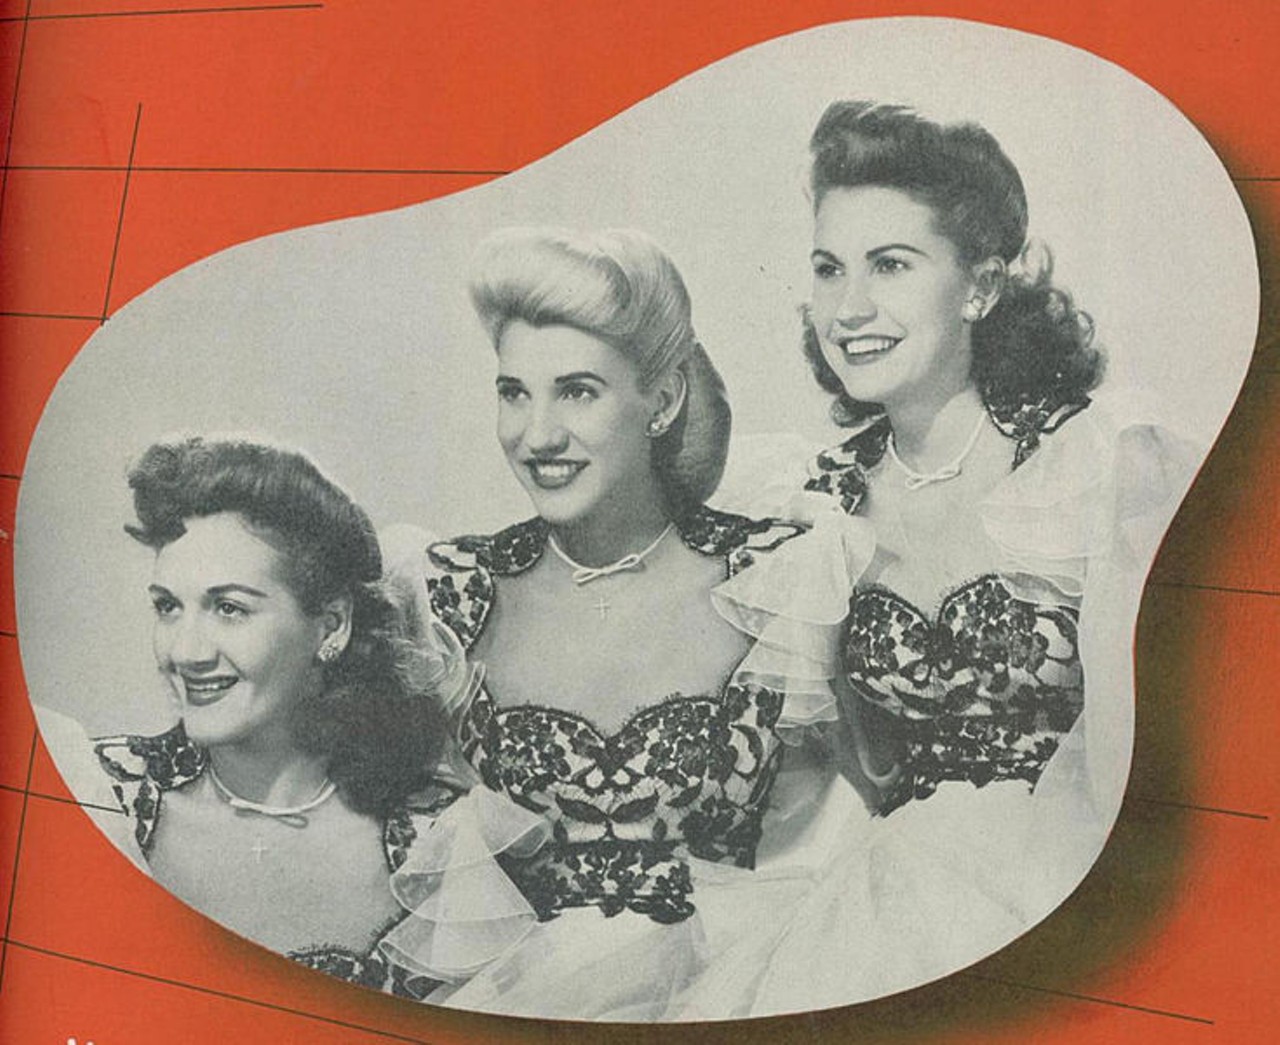 The Andrews Sisters &#151; "Rum and Coca-Cola"
Birthed in 1940s Trinidad by Lord Invader and Lionel Belasco, this song was popularized by three sisters from Minnesota and features not-so-savory allusions to prostitution.
Photo via promotional billboard (Creative Commons)